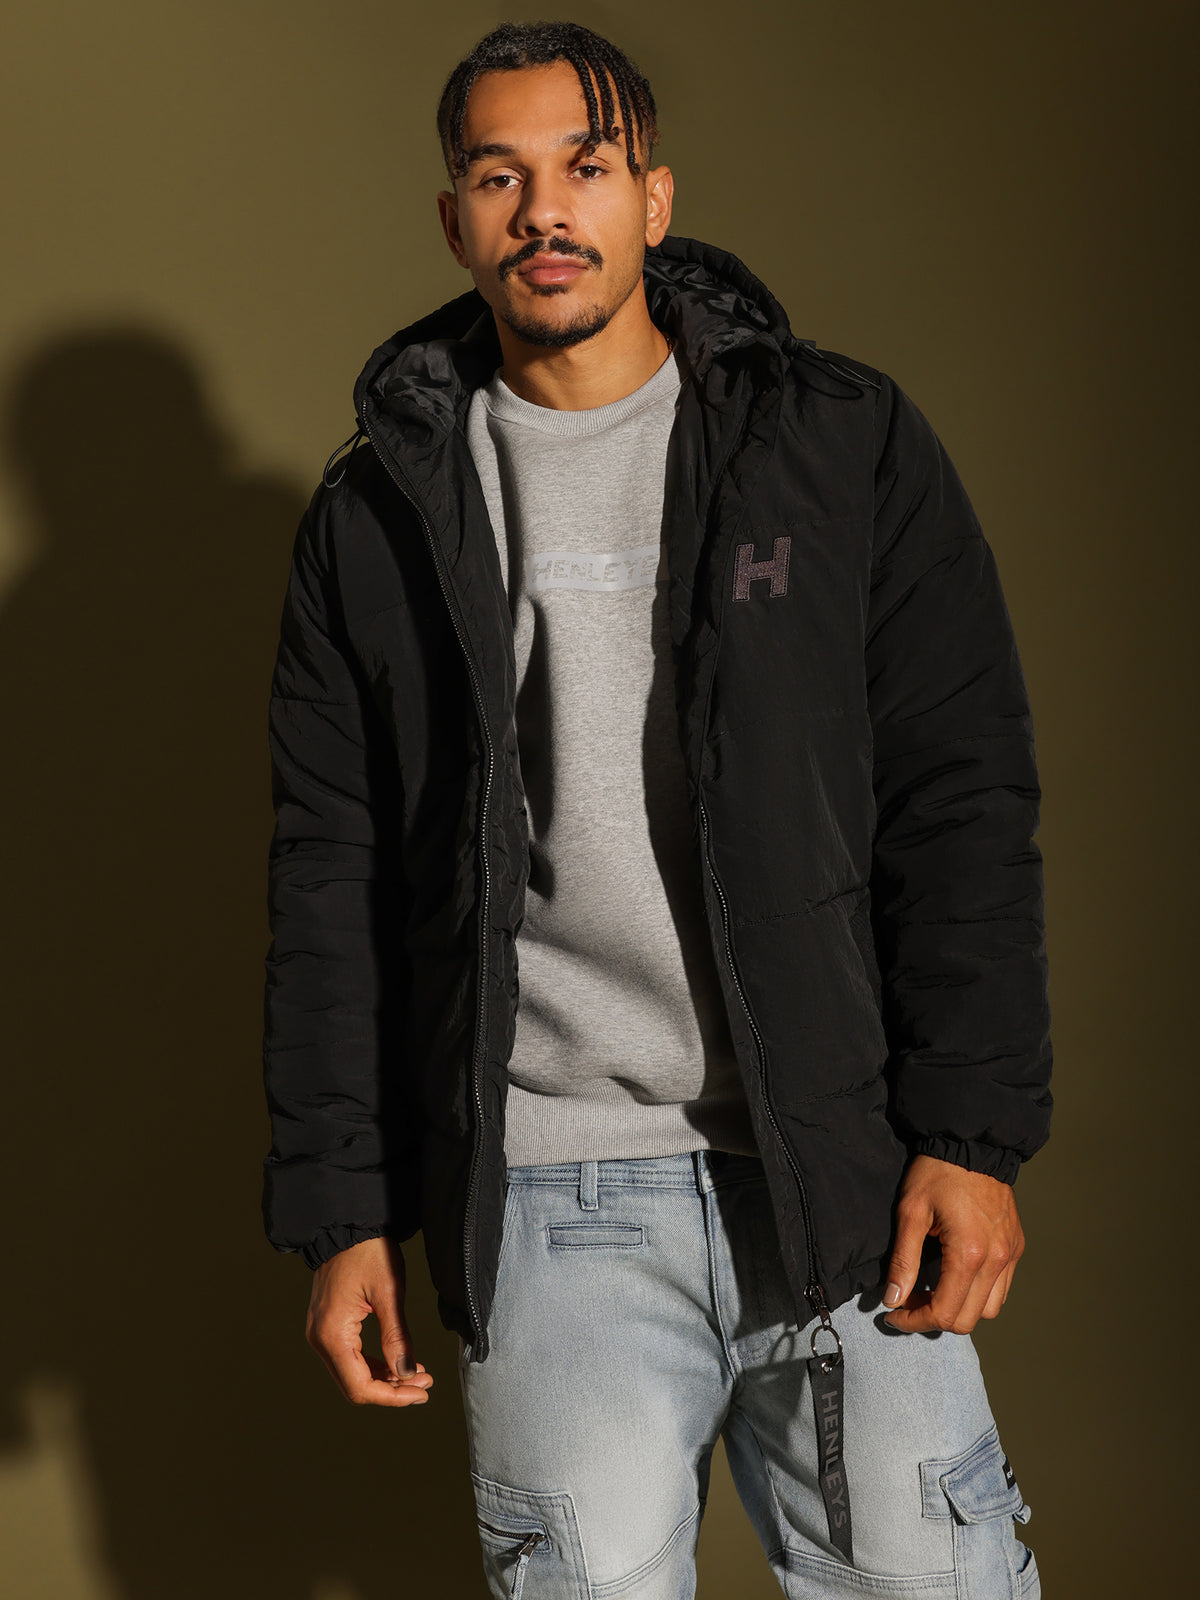 Overdrive Hooded Puffer Jacket in Black